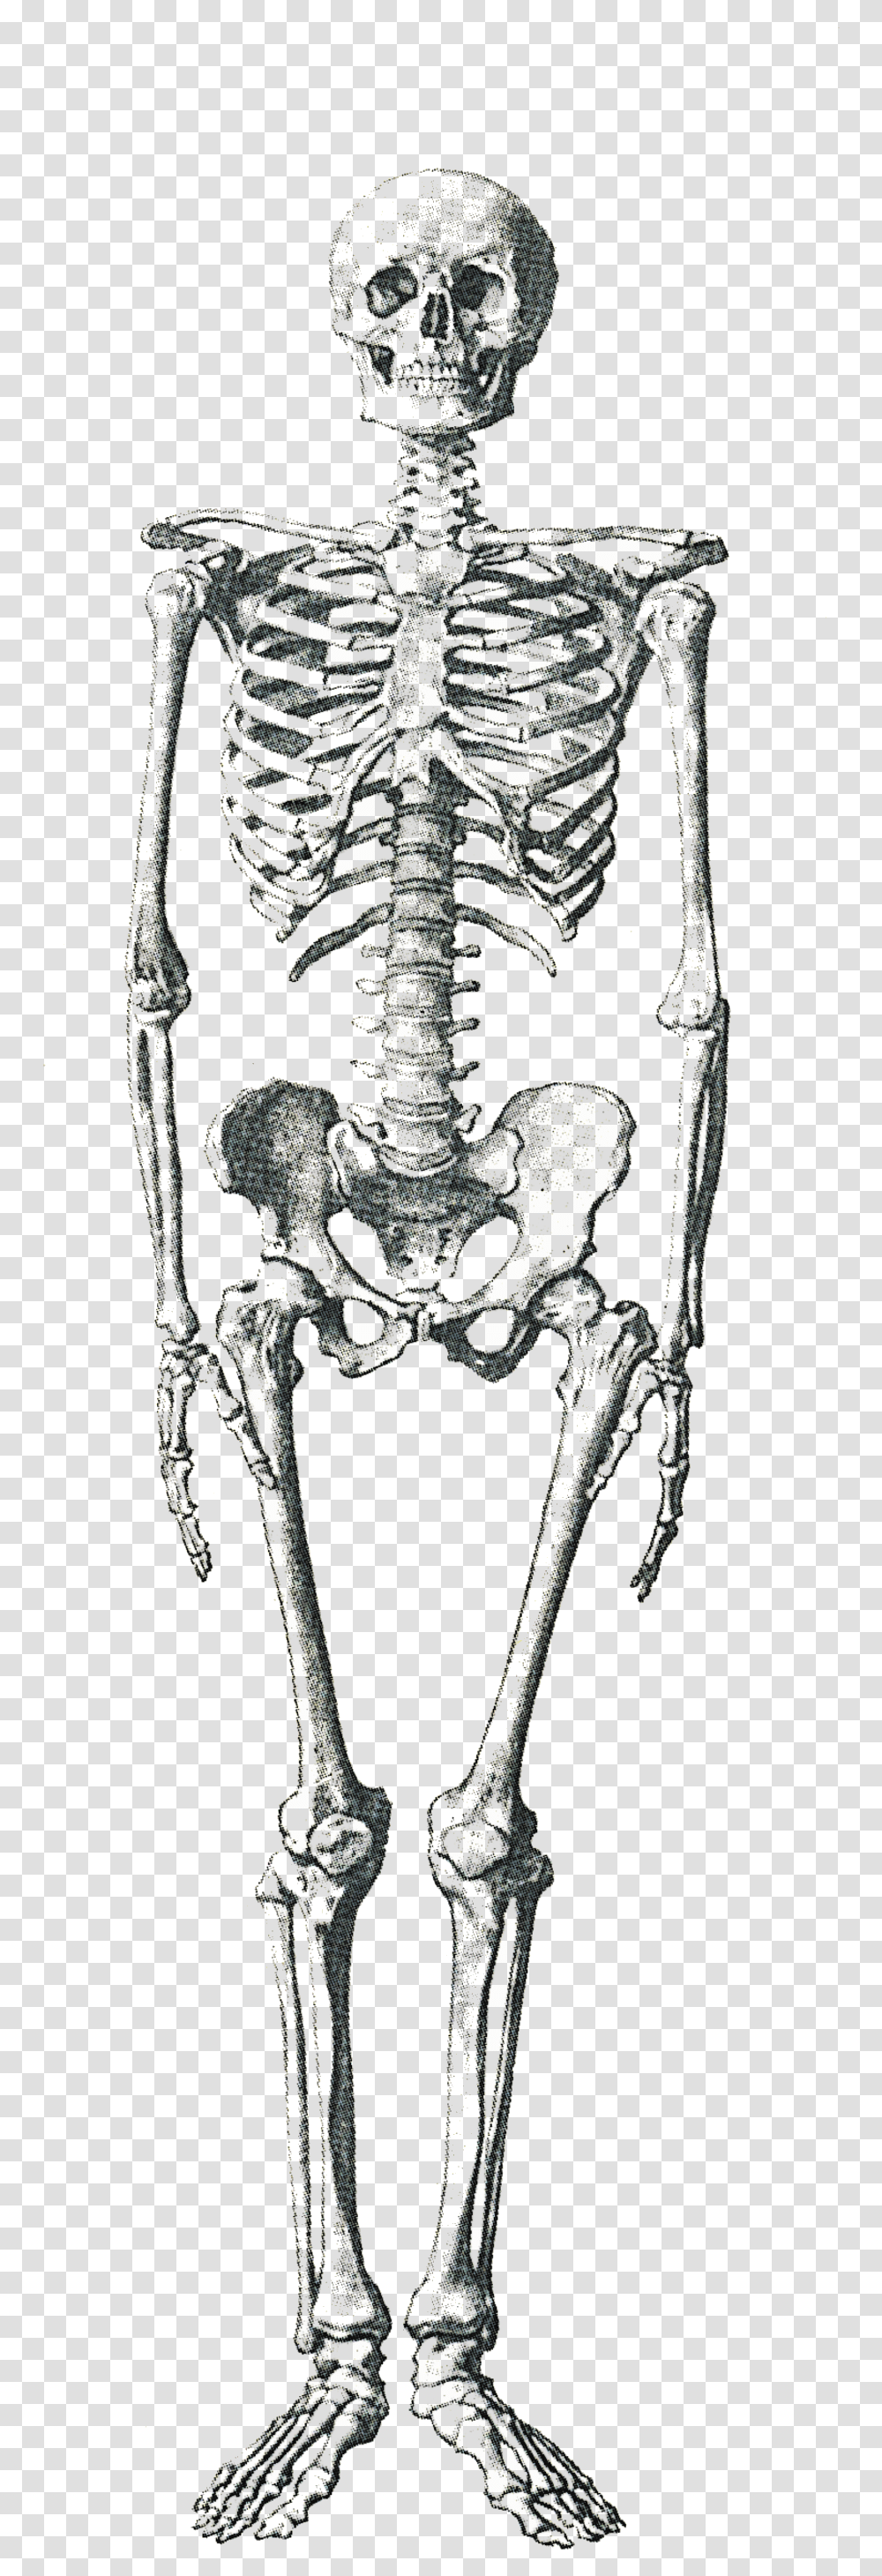 Ft Compared To Human, Skeleton Transparent Png